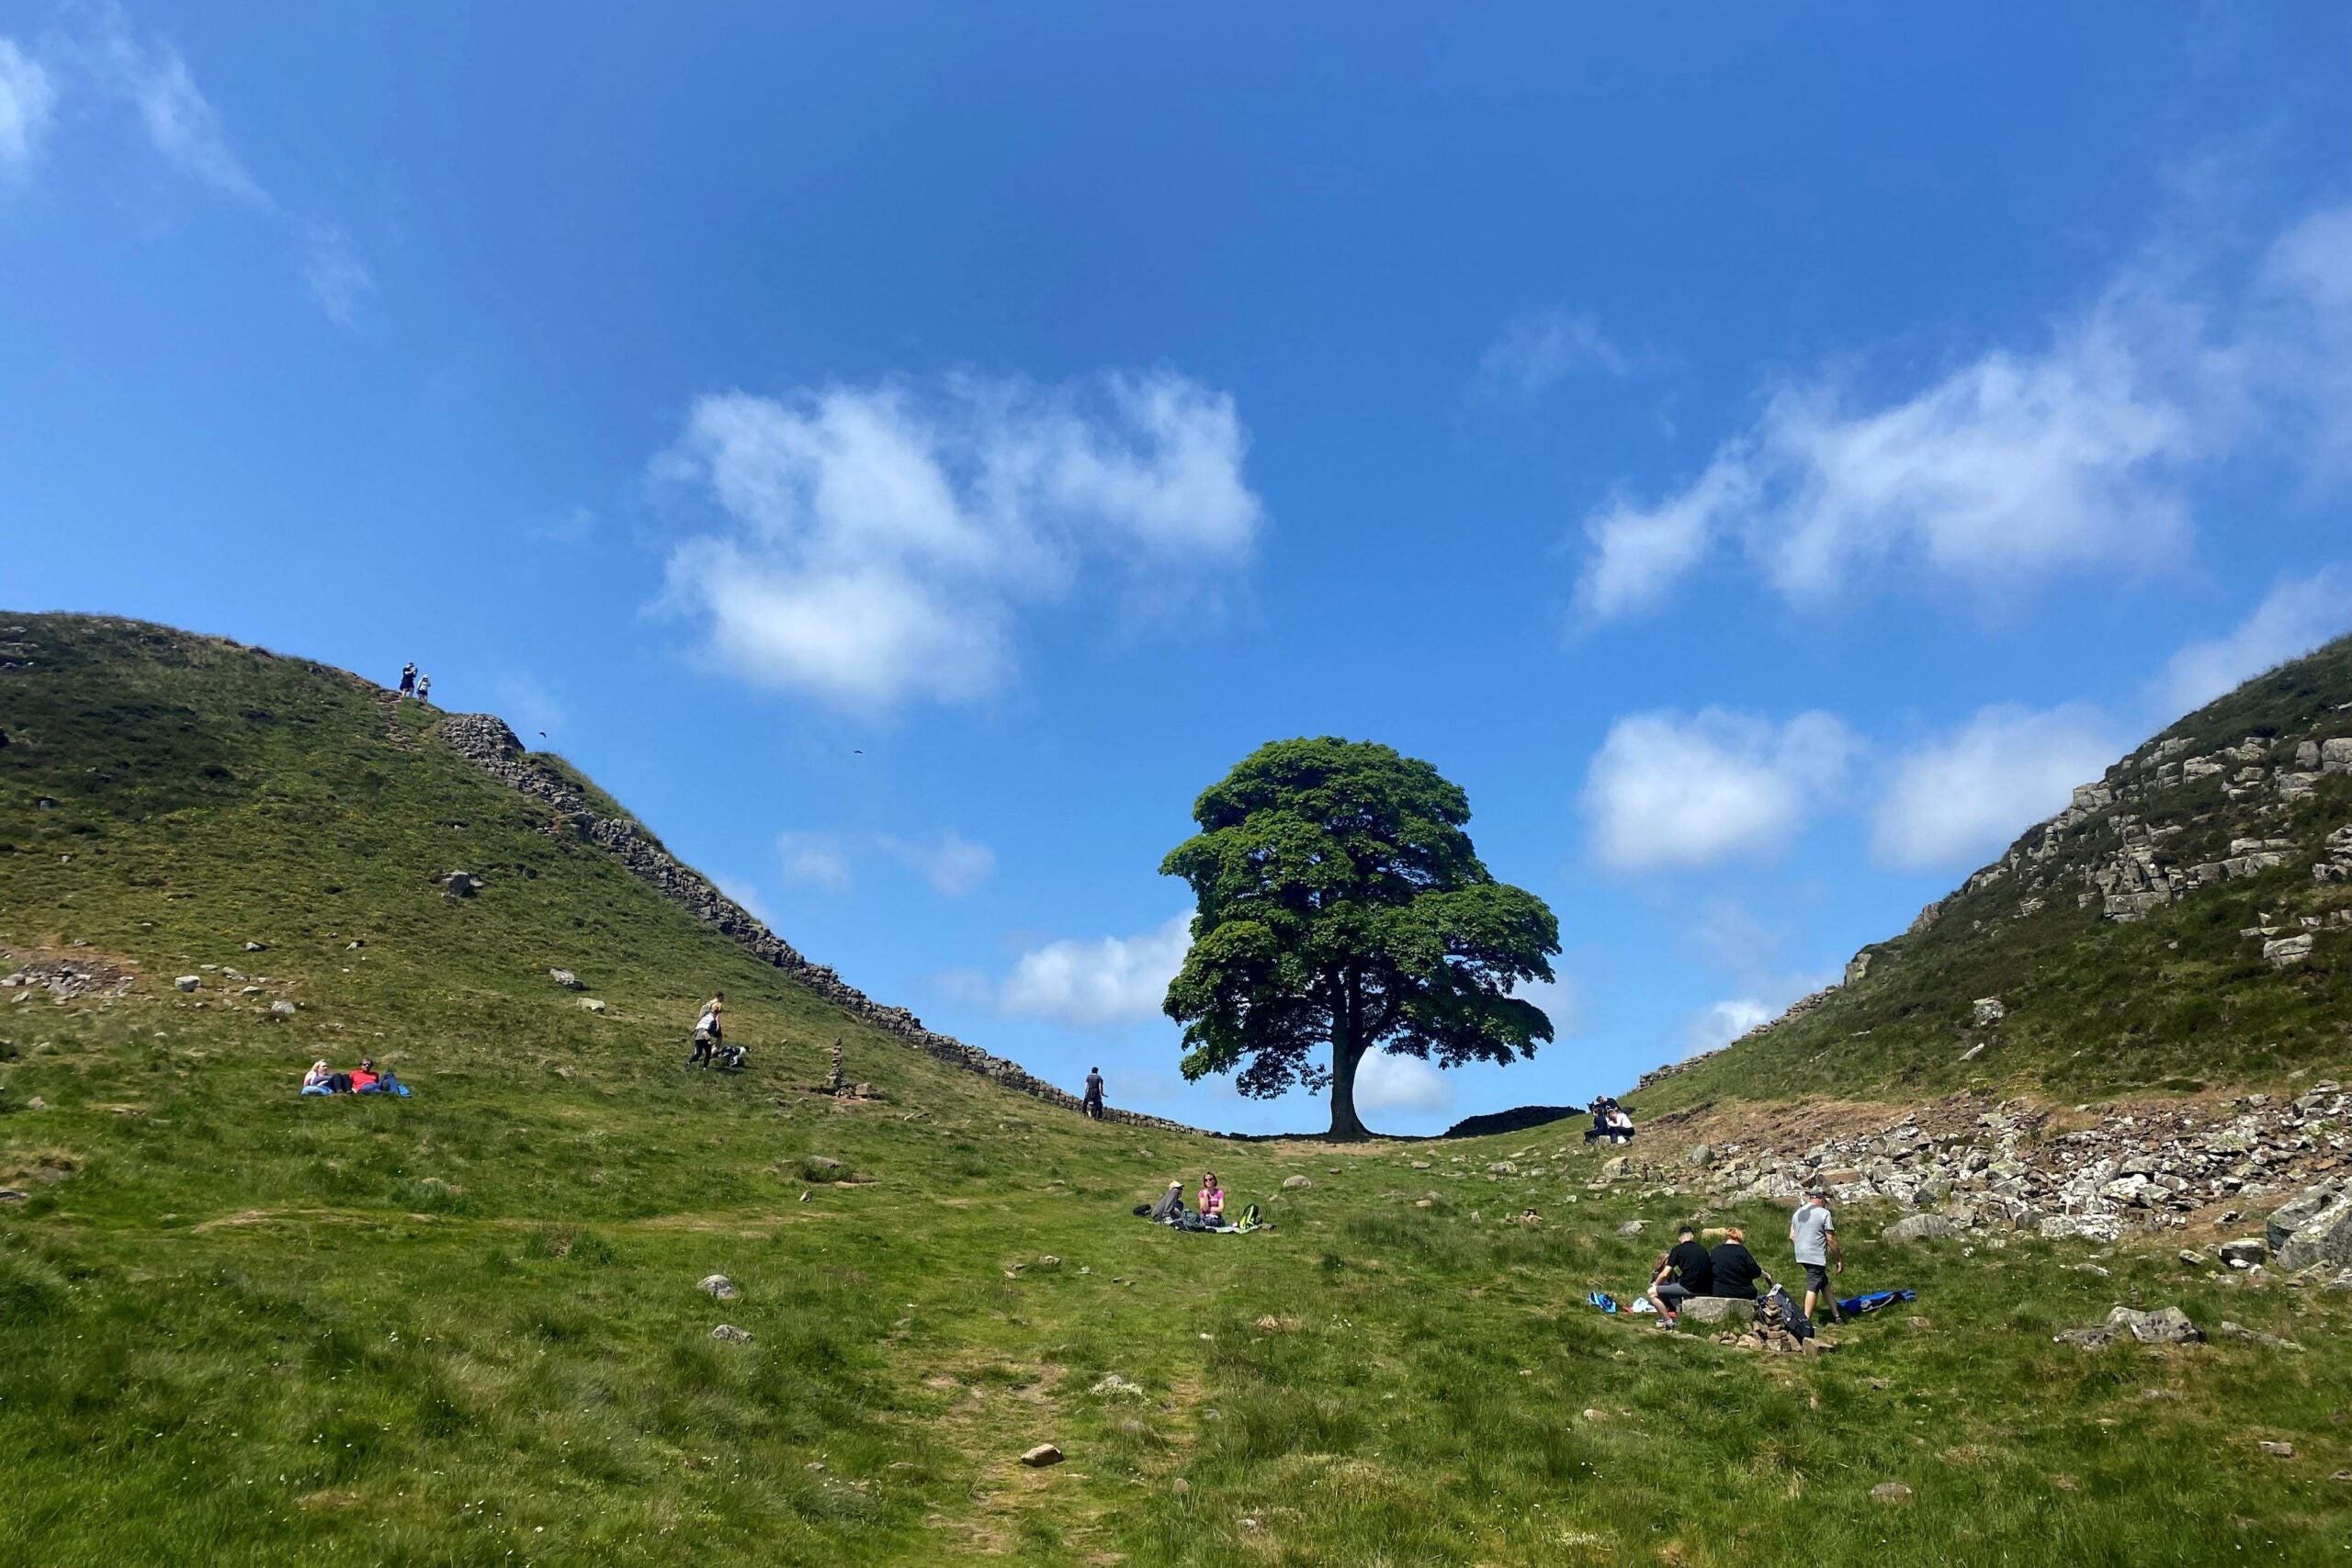 Sycamore Gap: Teen arrested after 200-year-old Hadrian's Wall tree  'deliberately felled